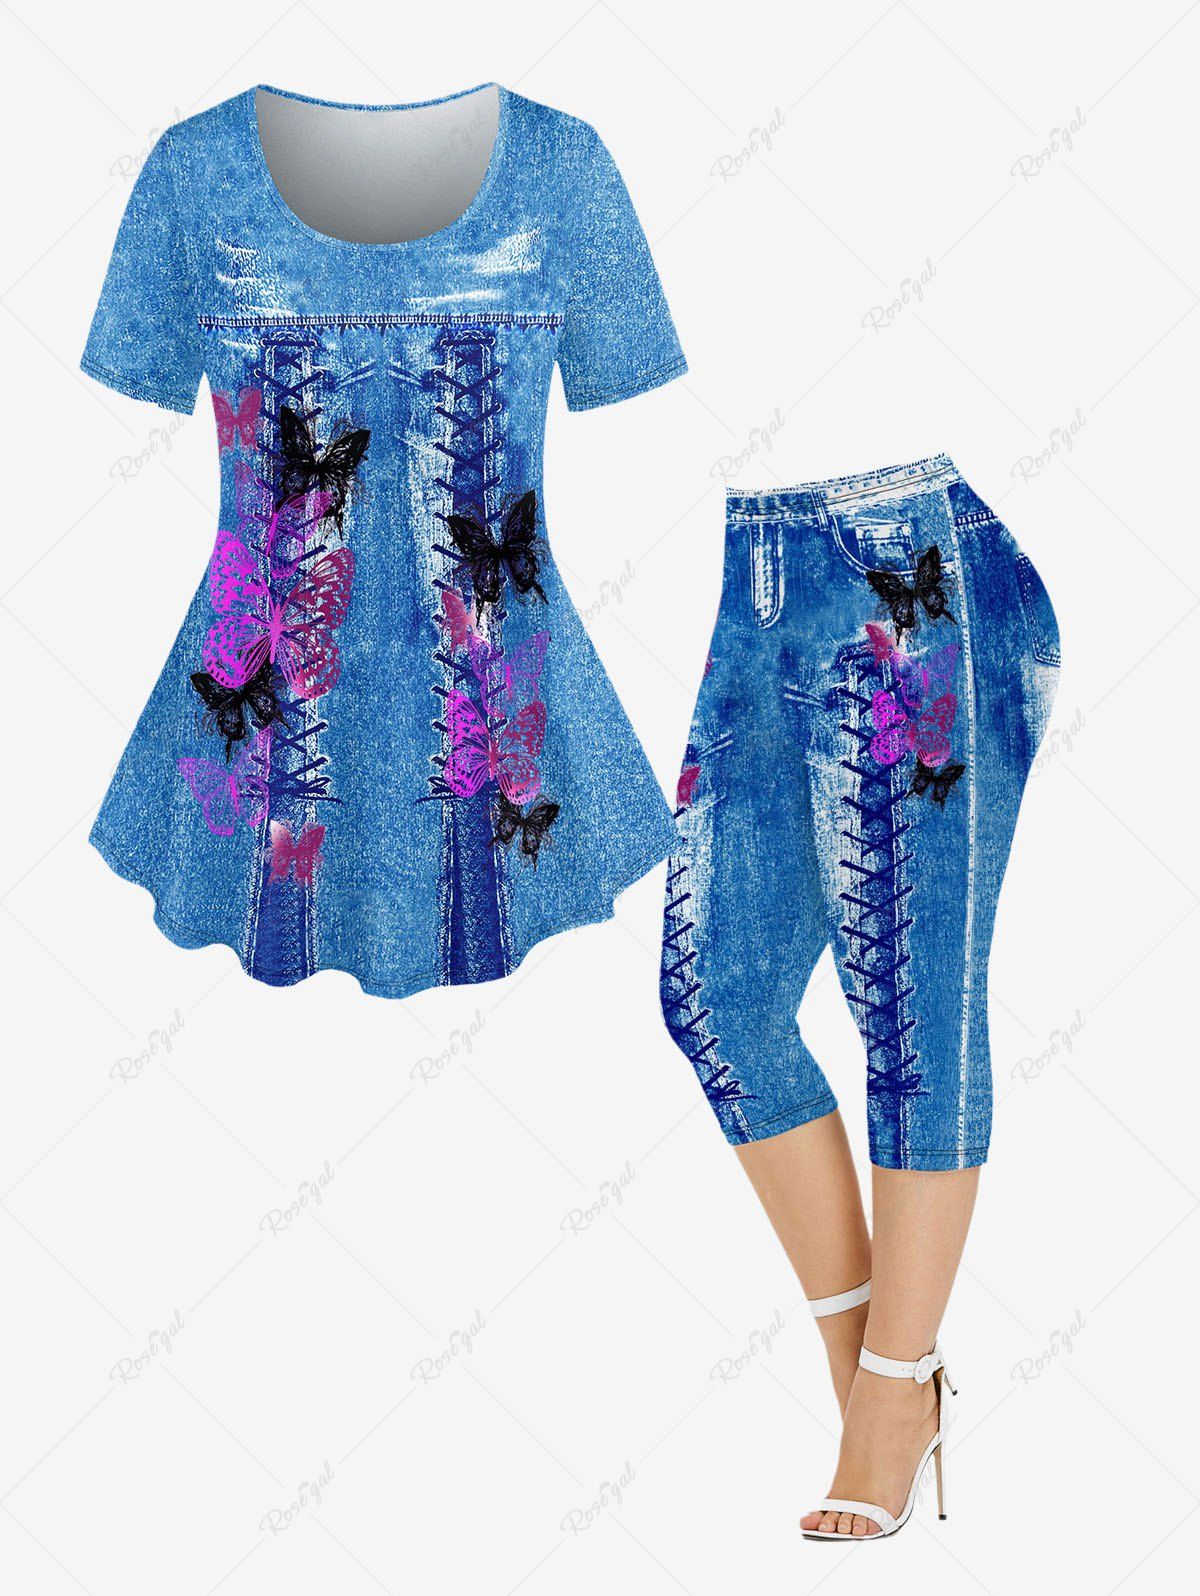 New 3D Lace Up Denim Butterfly Printed T-shirt and Capri Leggings Plus Size Matching Set  